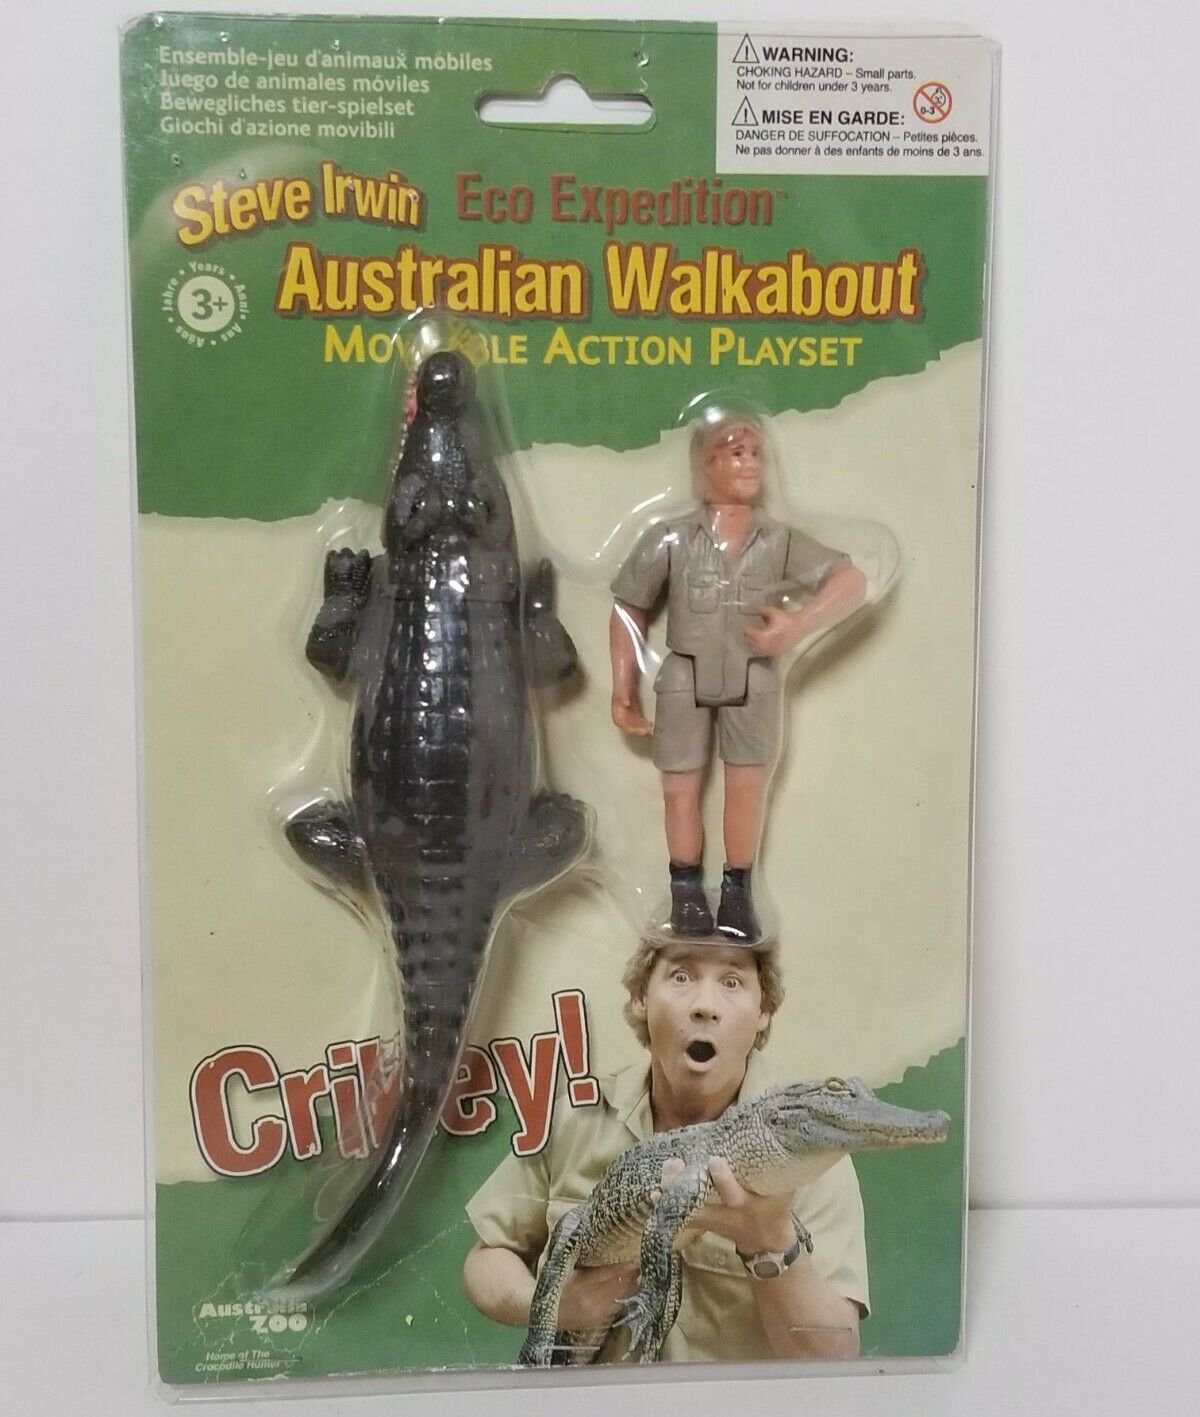 2005 Steve Irwin Eco Expedition Australian Walkabout Movable Action Playset